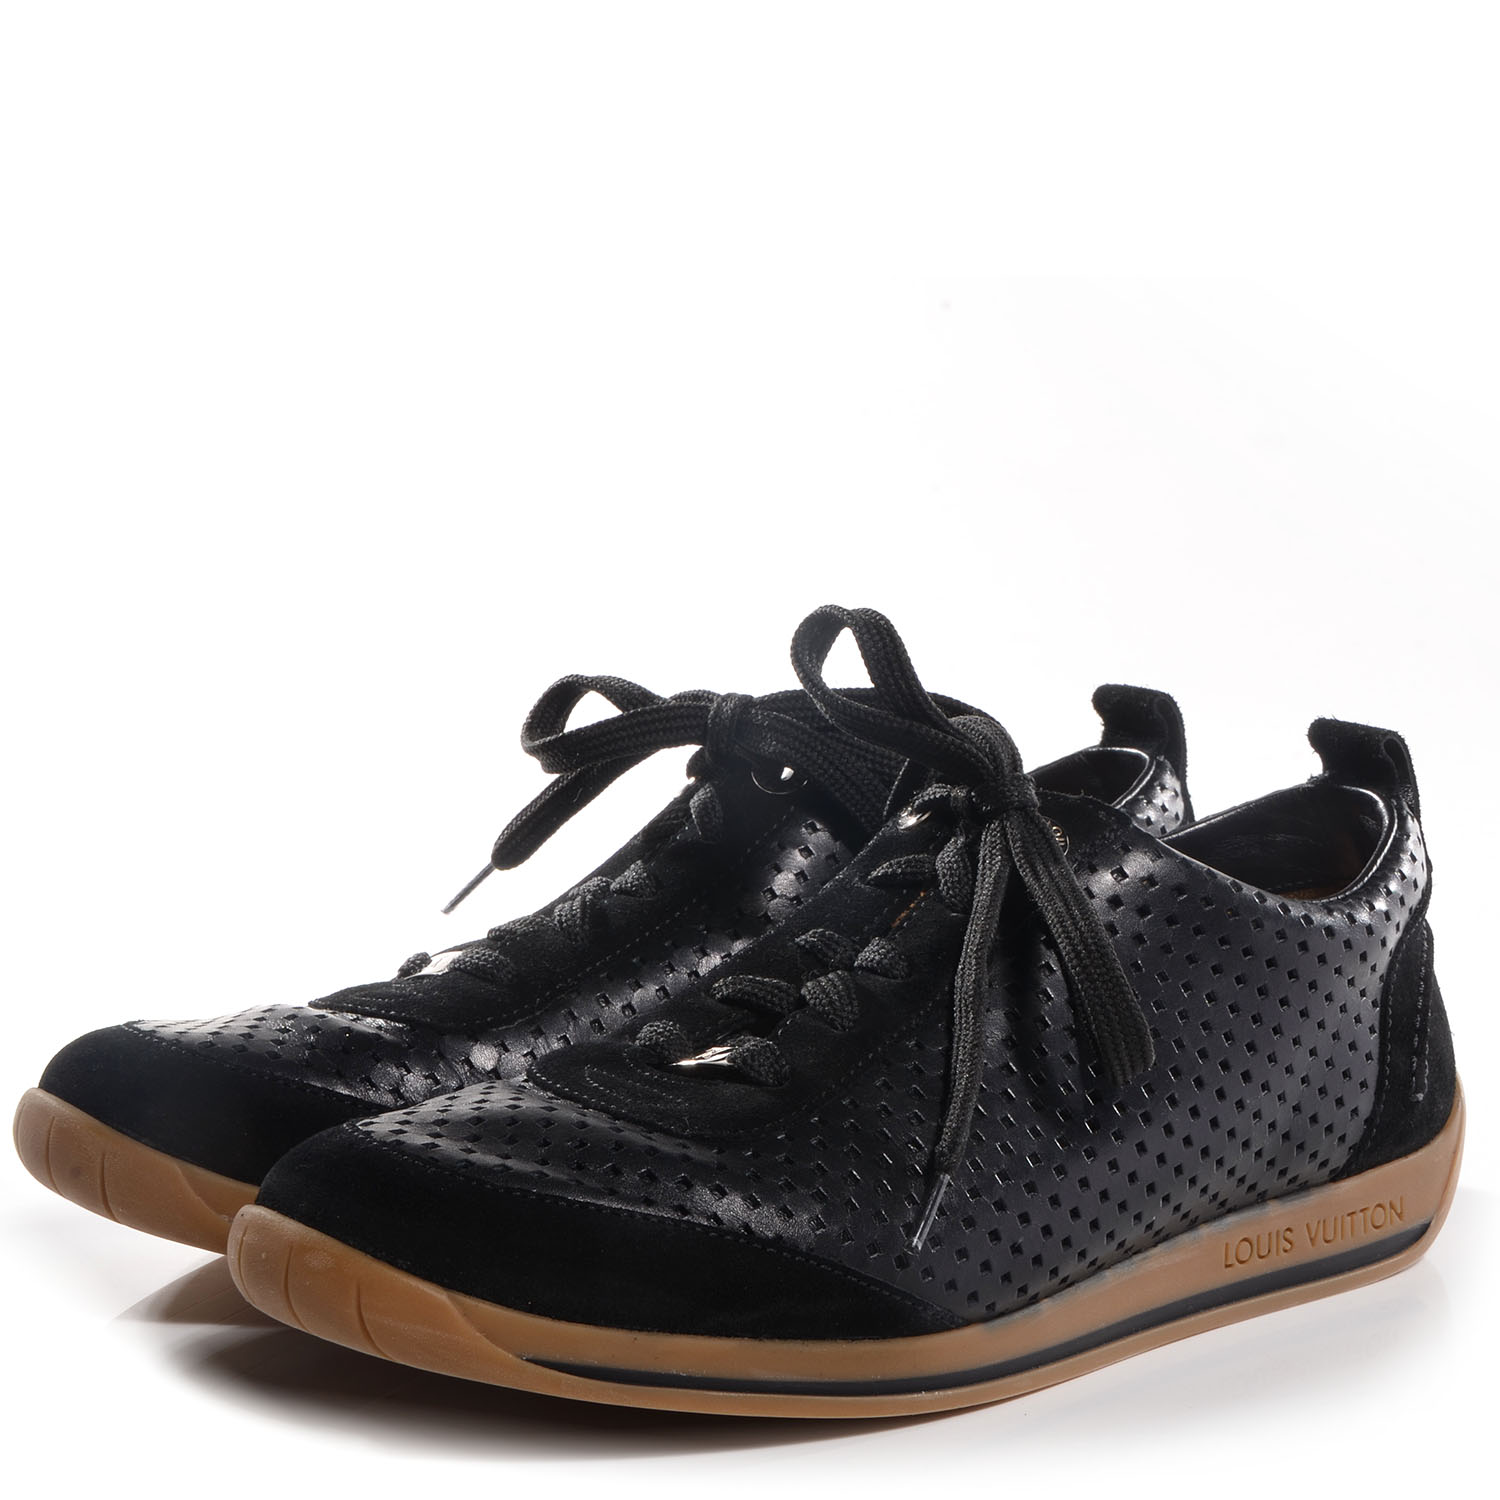 LOUIS VUITTON Leather Suede Vence Sneakers 39 Black 70774